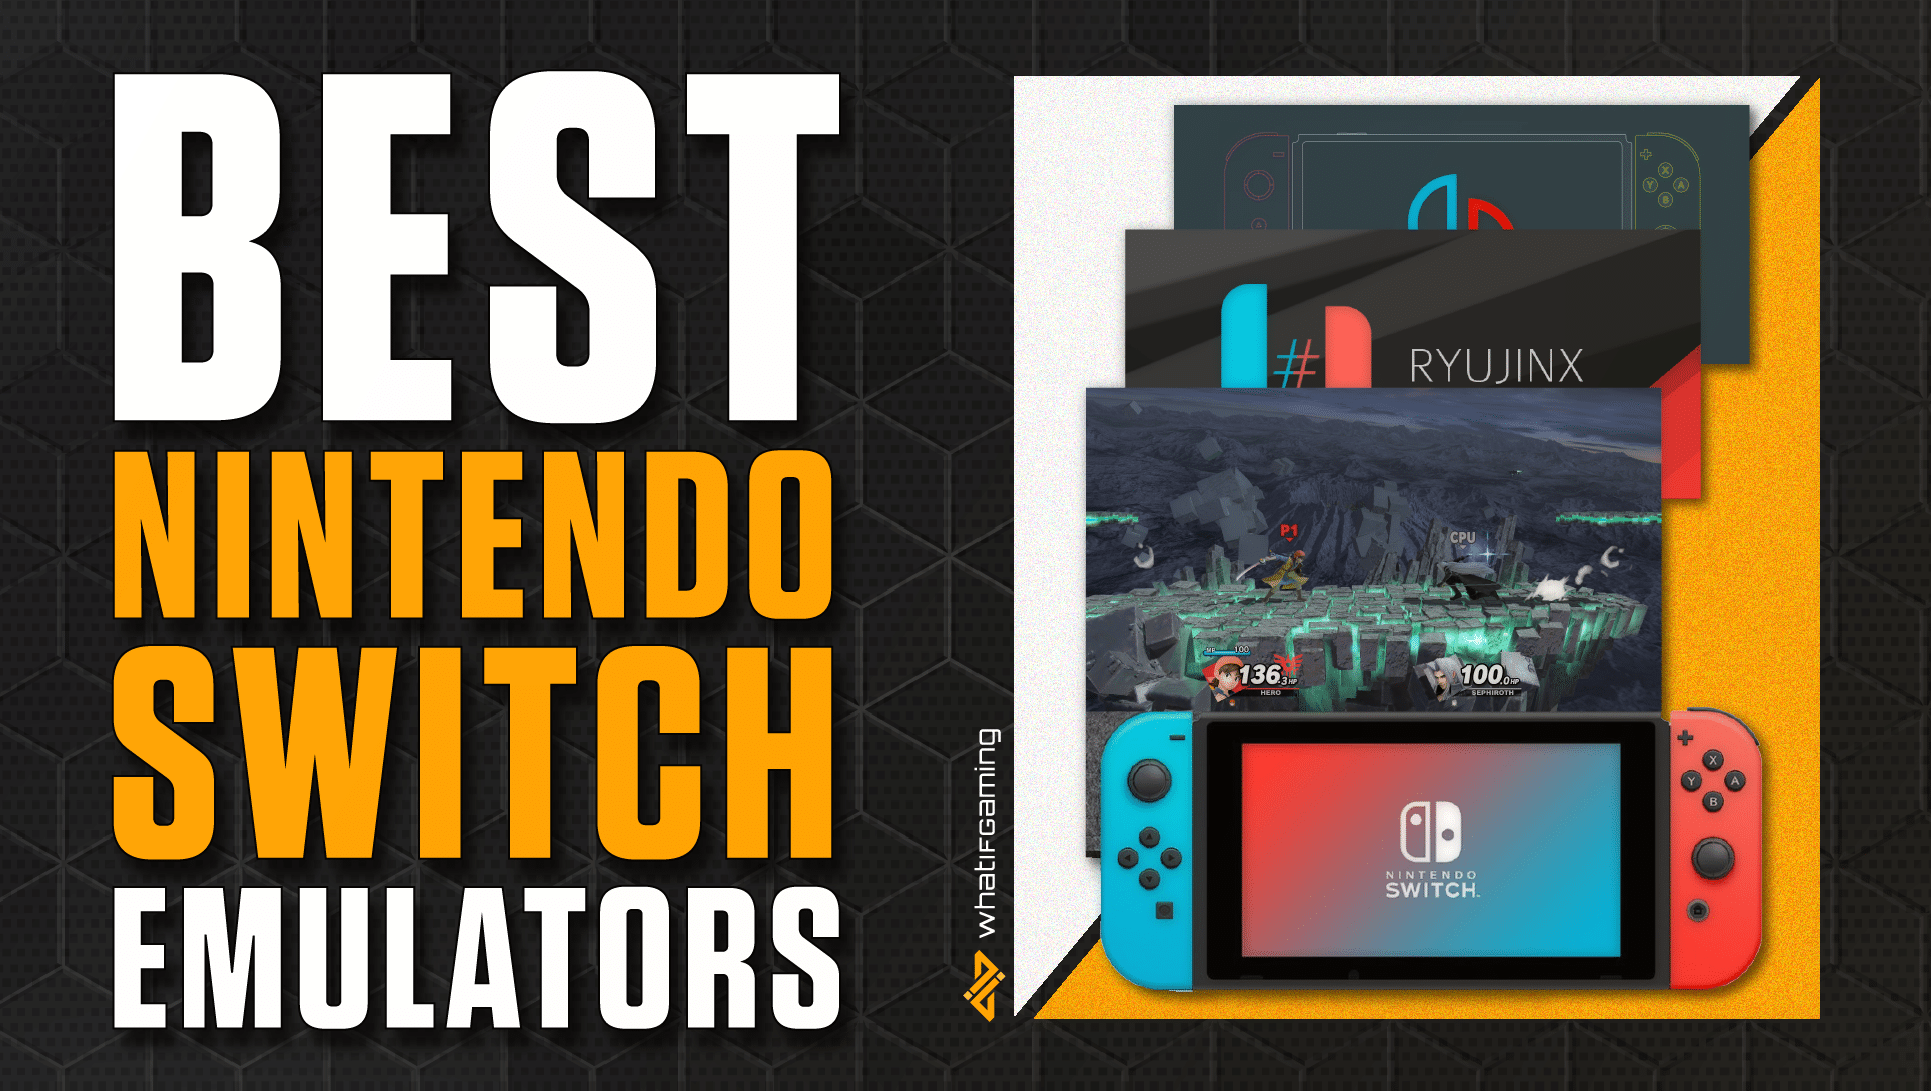 Top 3 Android Emulators for Nintendo Switch - Which is Best? — Eightify